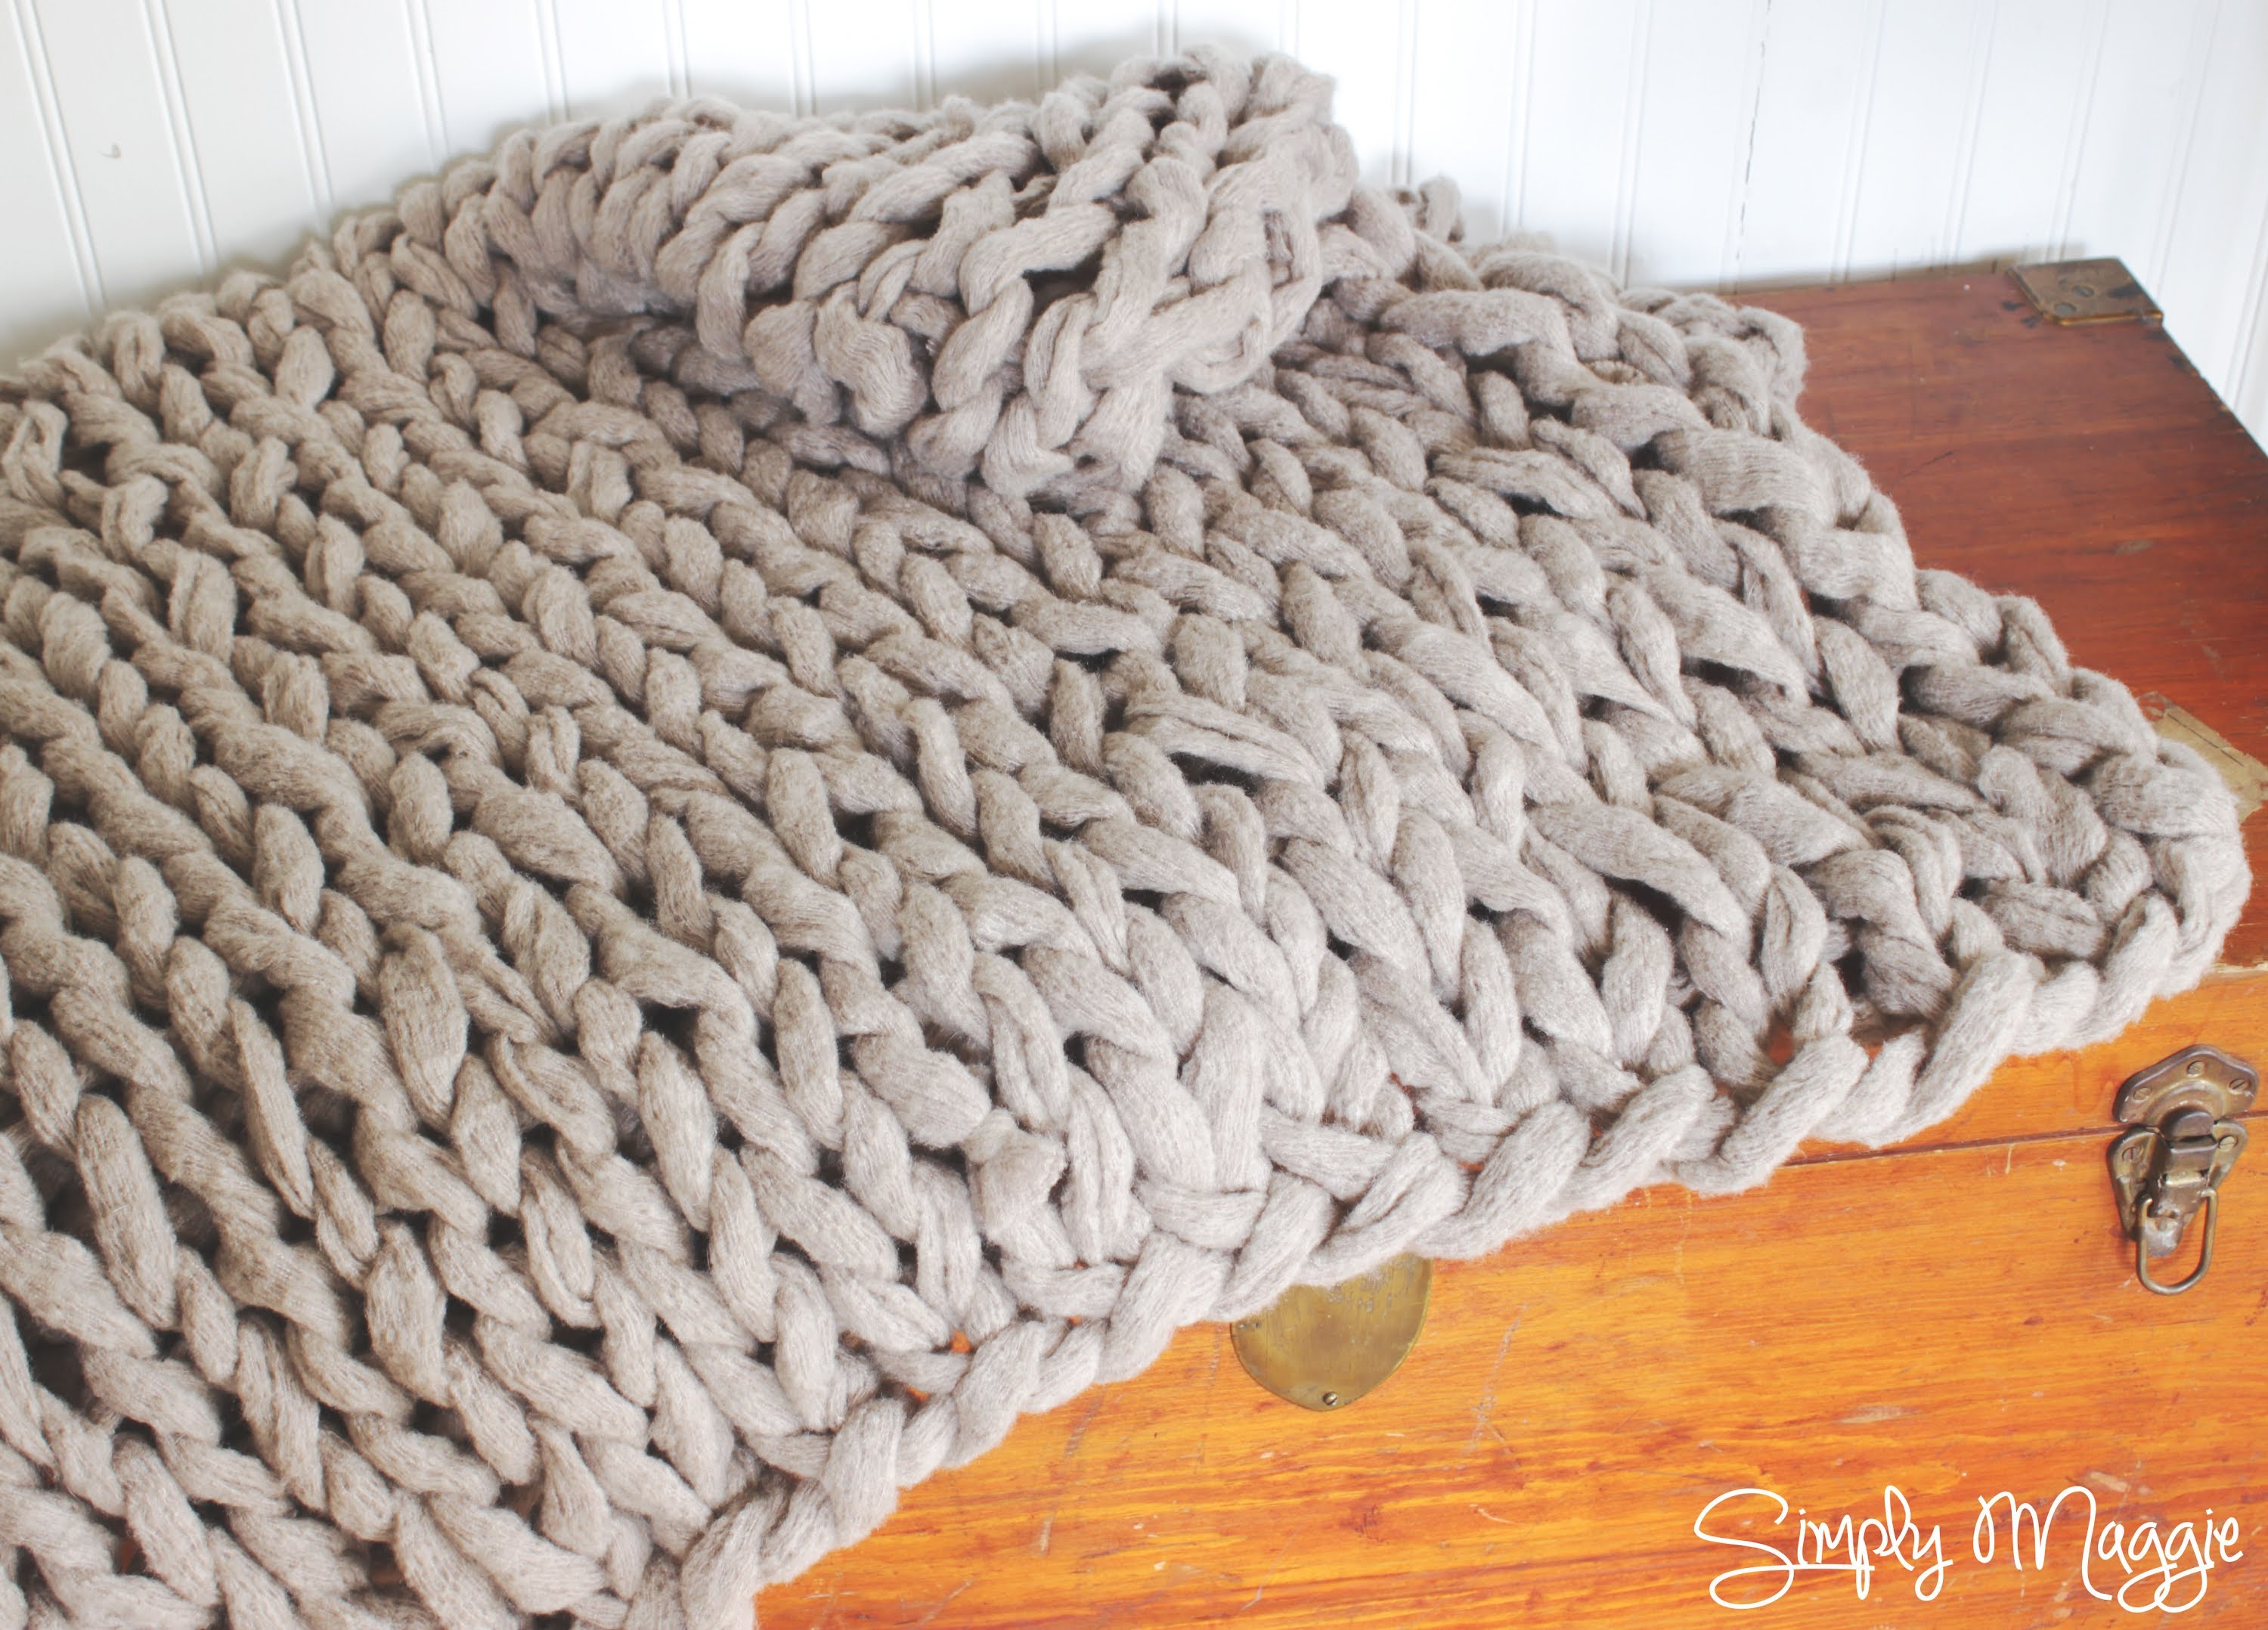 knit blanket how to arm knit a blanket in 45 minutes with simply maggie - youtube NFBXRKM